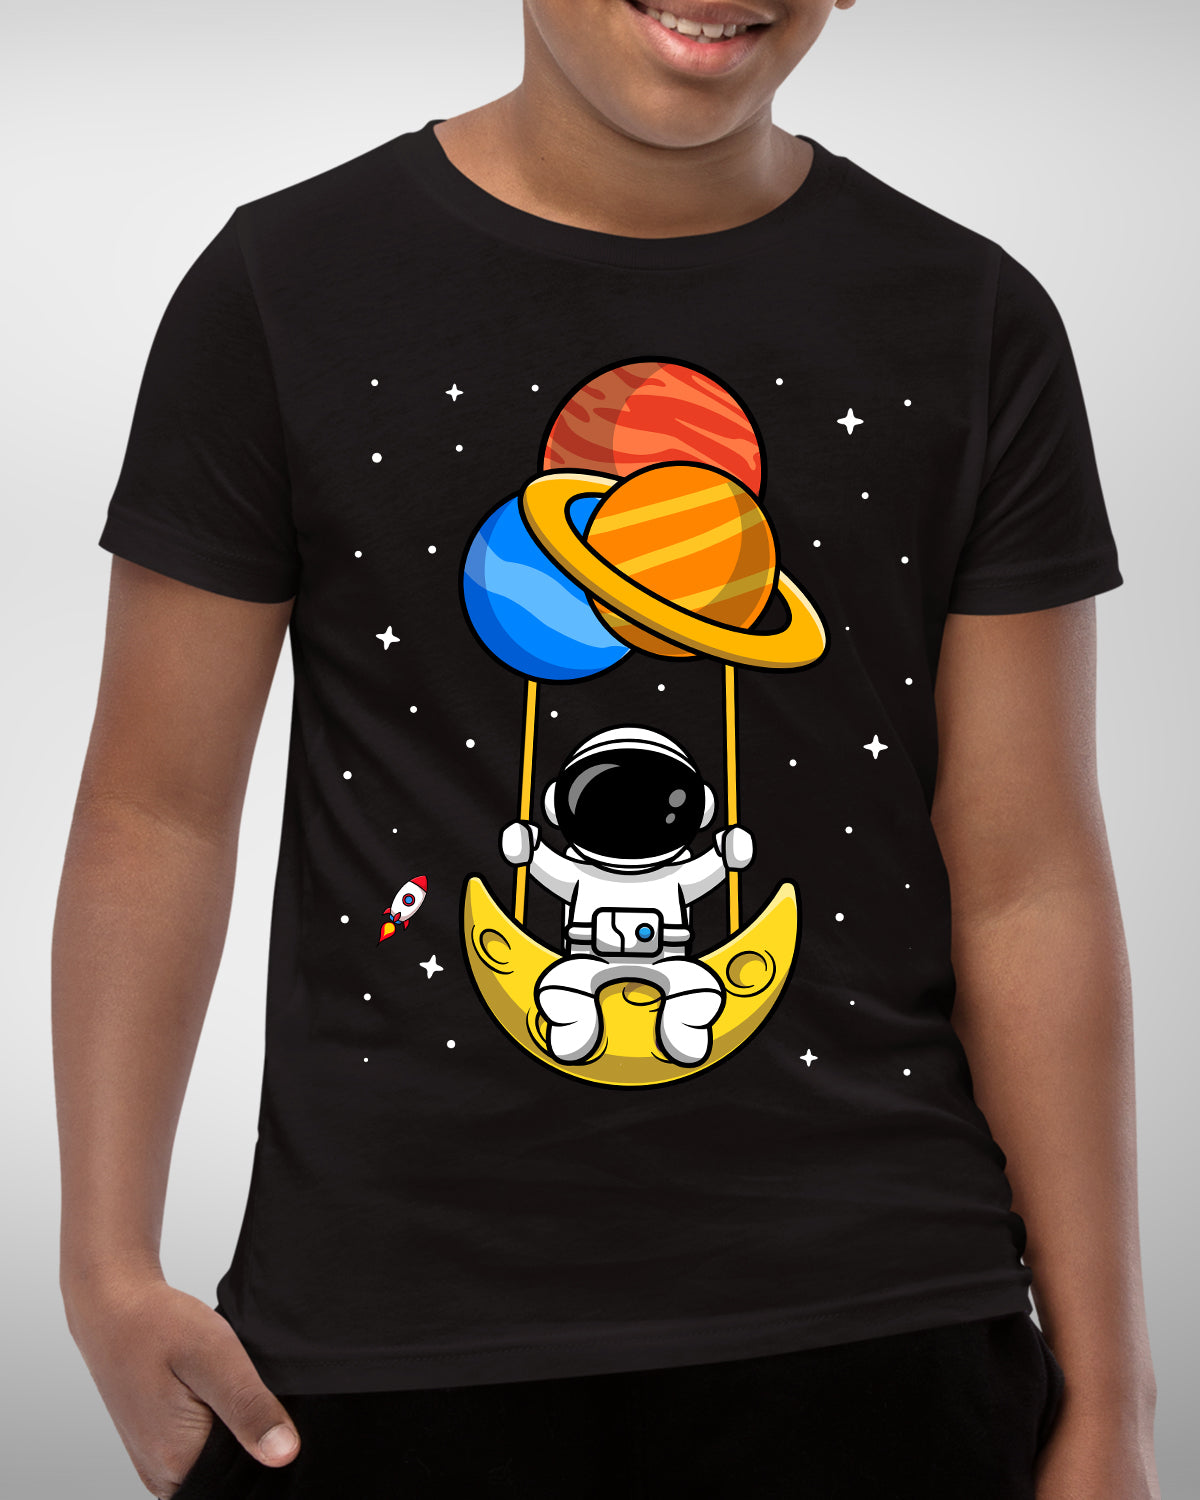 Astronaut Shirt - Moon Swing and Planets - Funny Space Tee